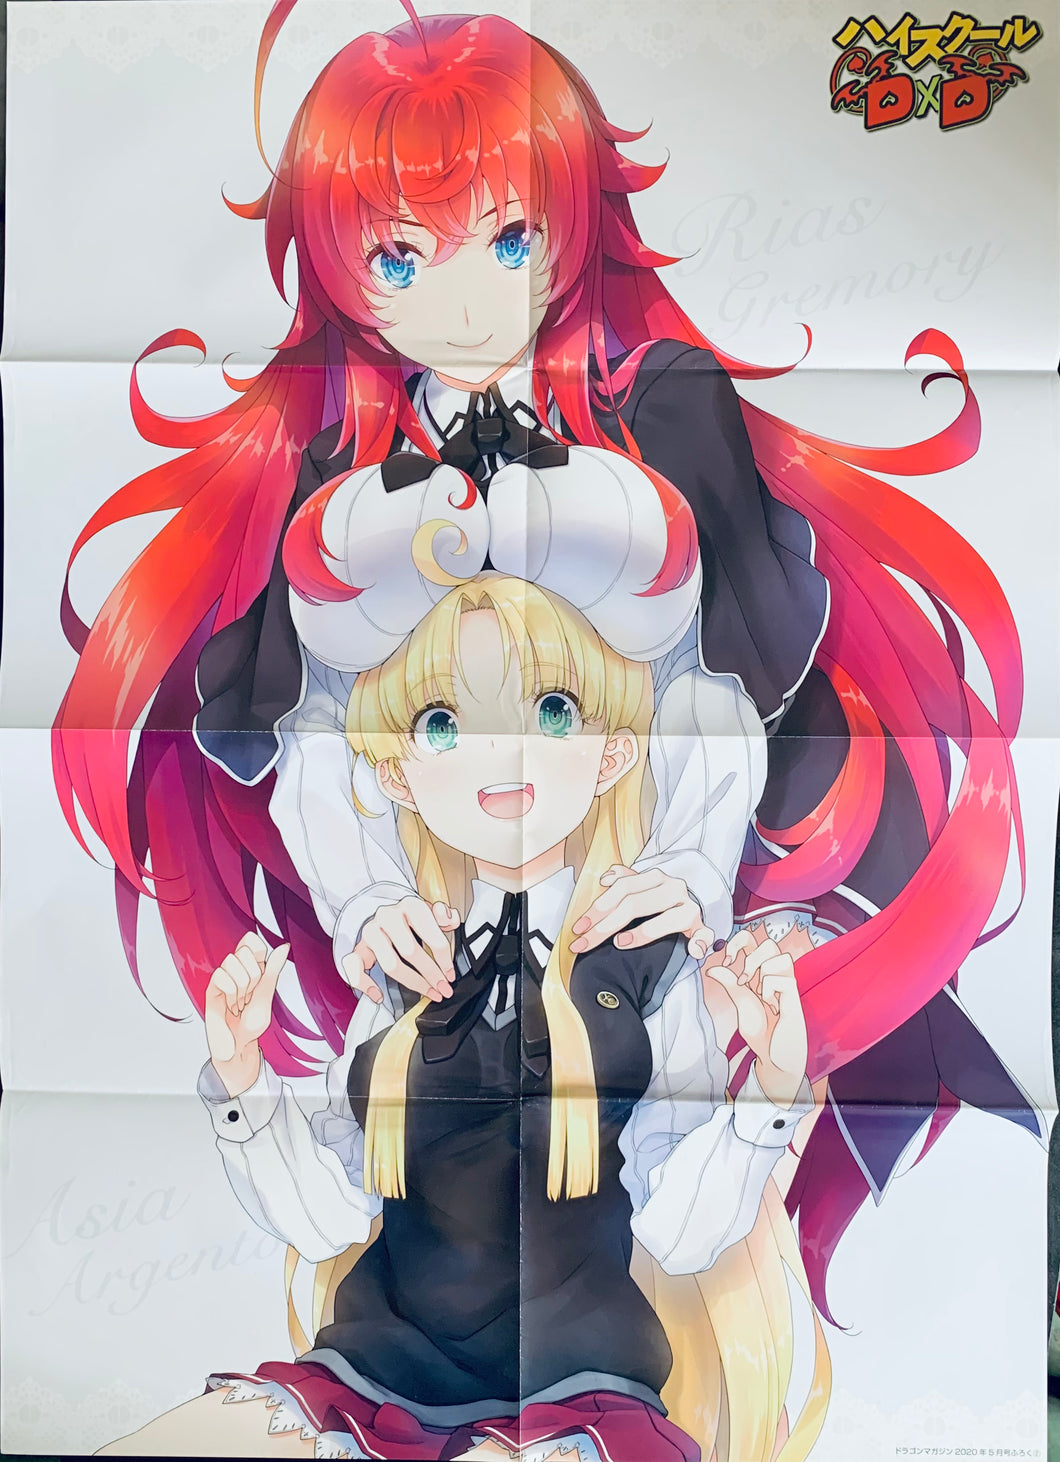 Highschool DxD - Rias Gremory & Asia Argento - B2 Poster - Monthly Dragon May 2020 Appendix